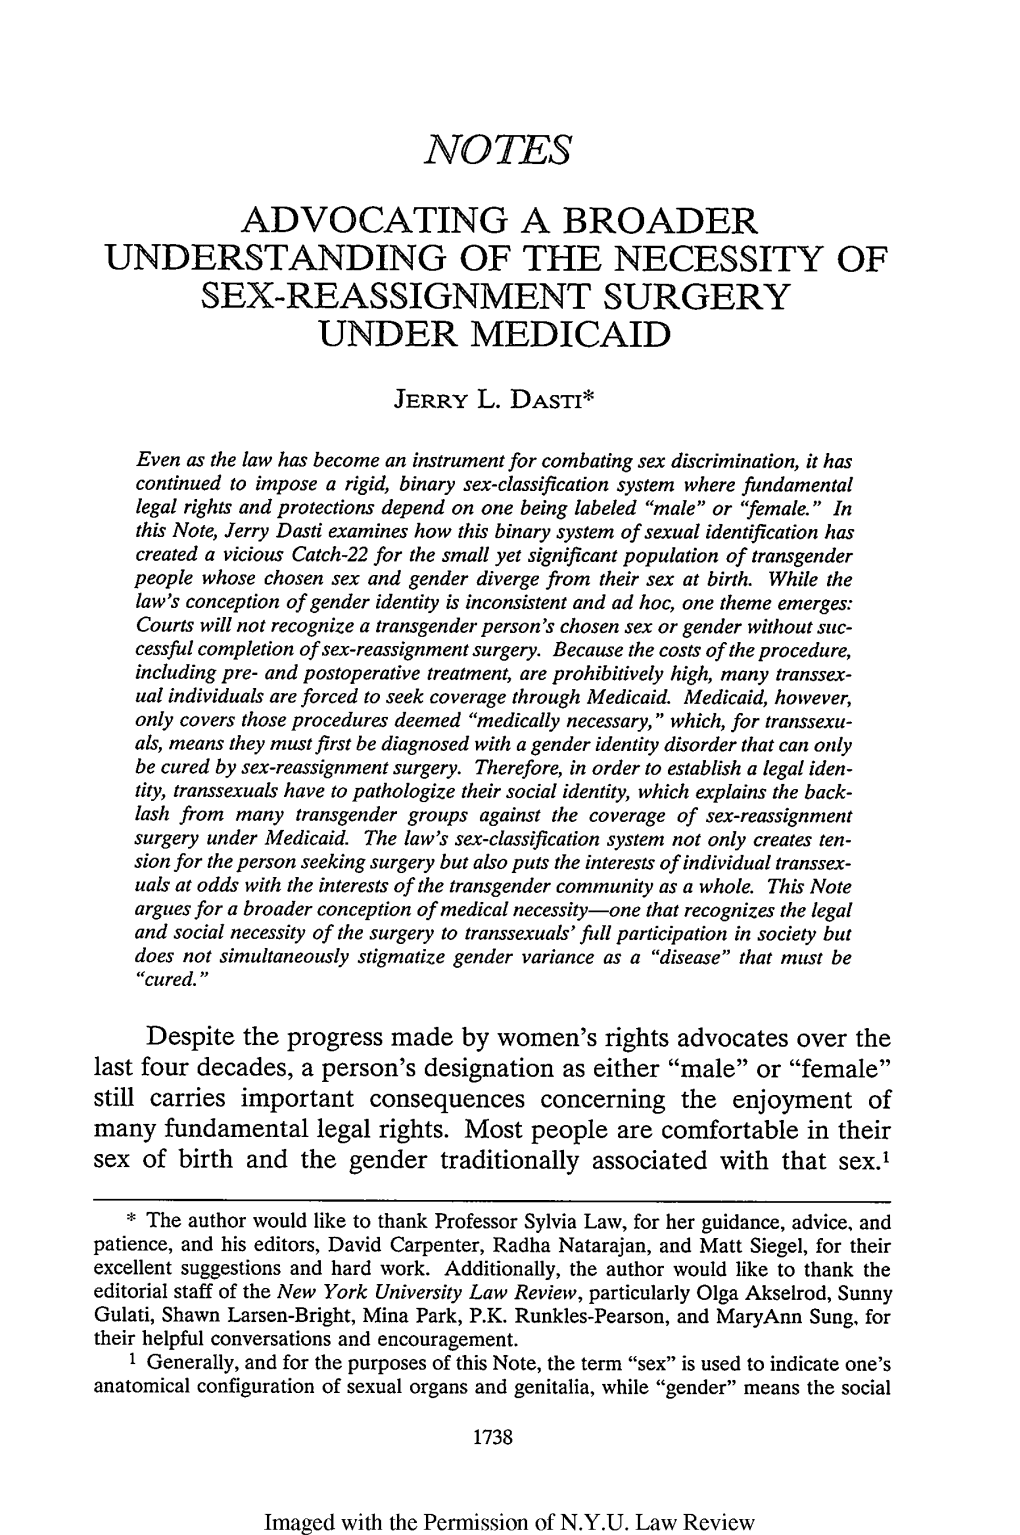 Notes Advocating a Broader Understanding of the Necessity of Sex-Reassignment Surgery Under Medicaid